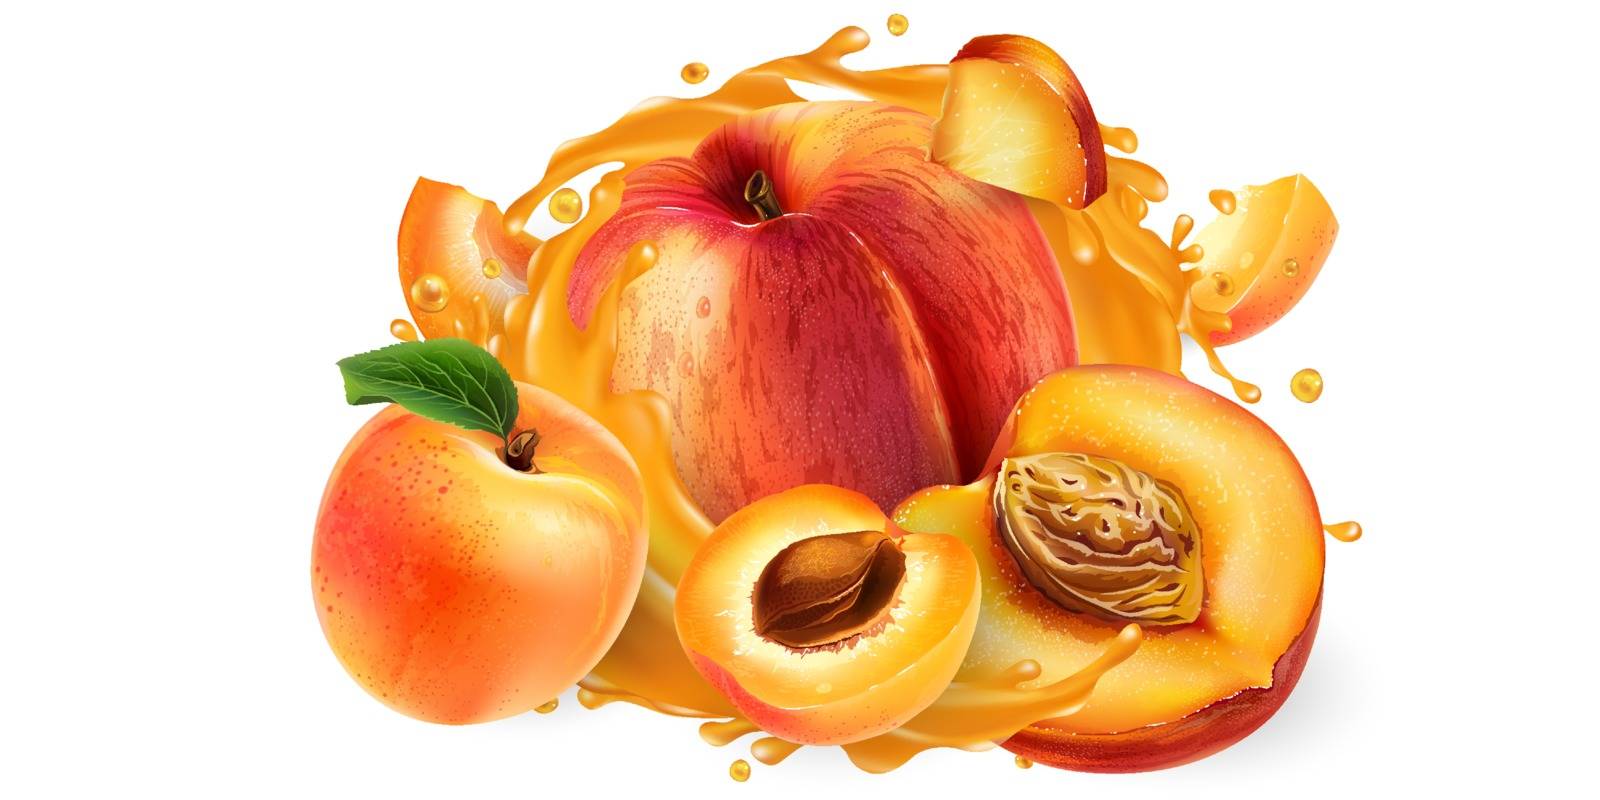 Fresh peaches and apricots and a splash of fruit juice on a white background. Realistic vector illustration.